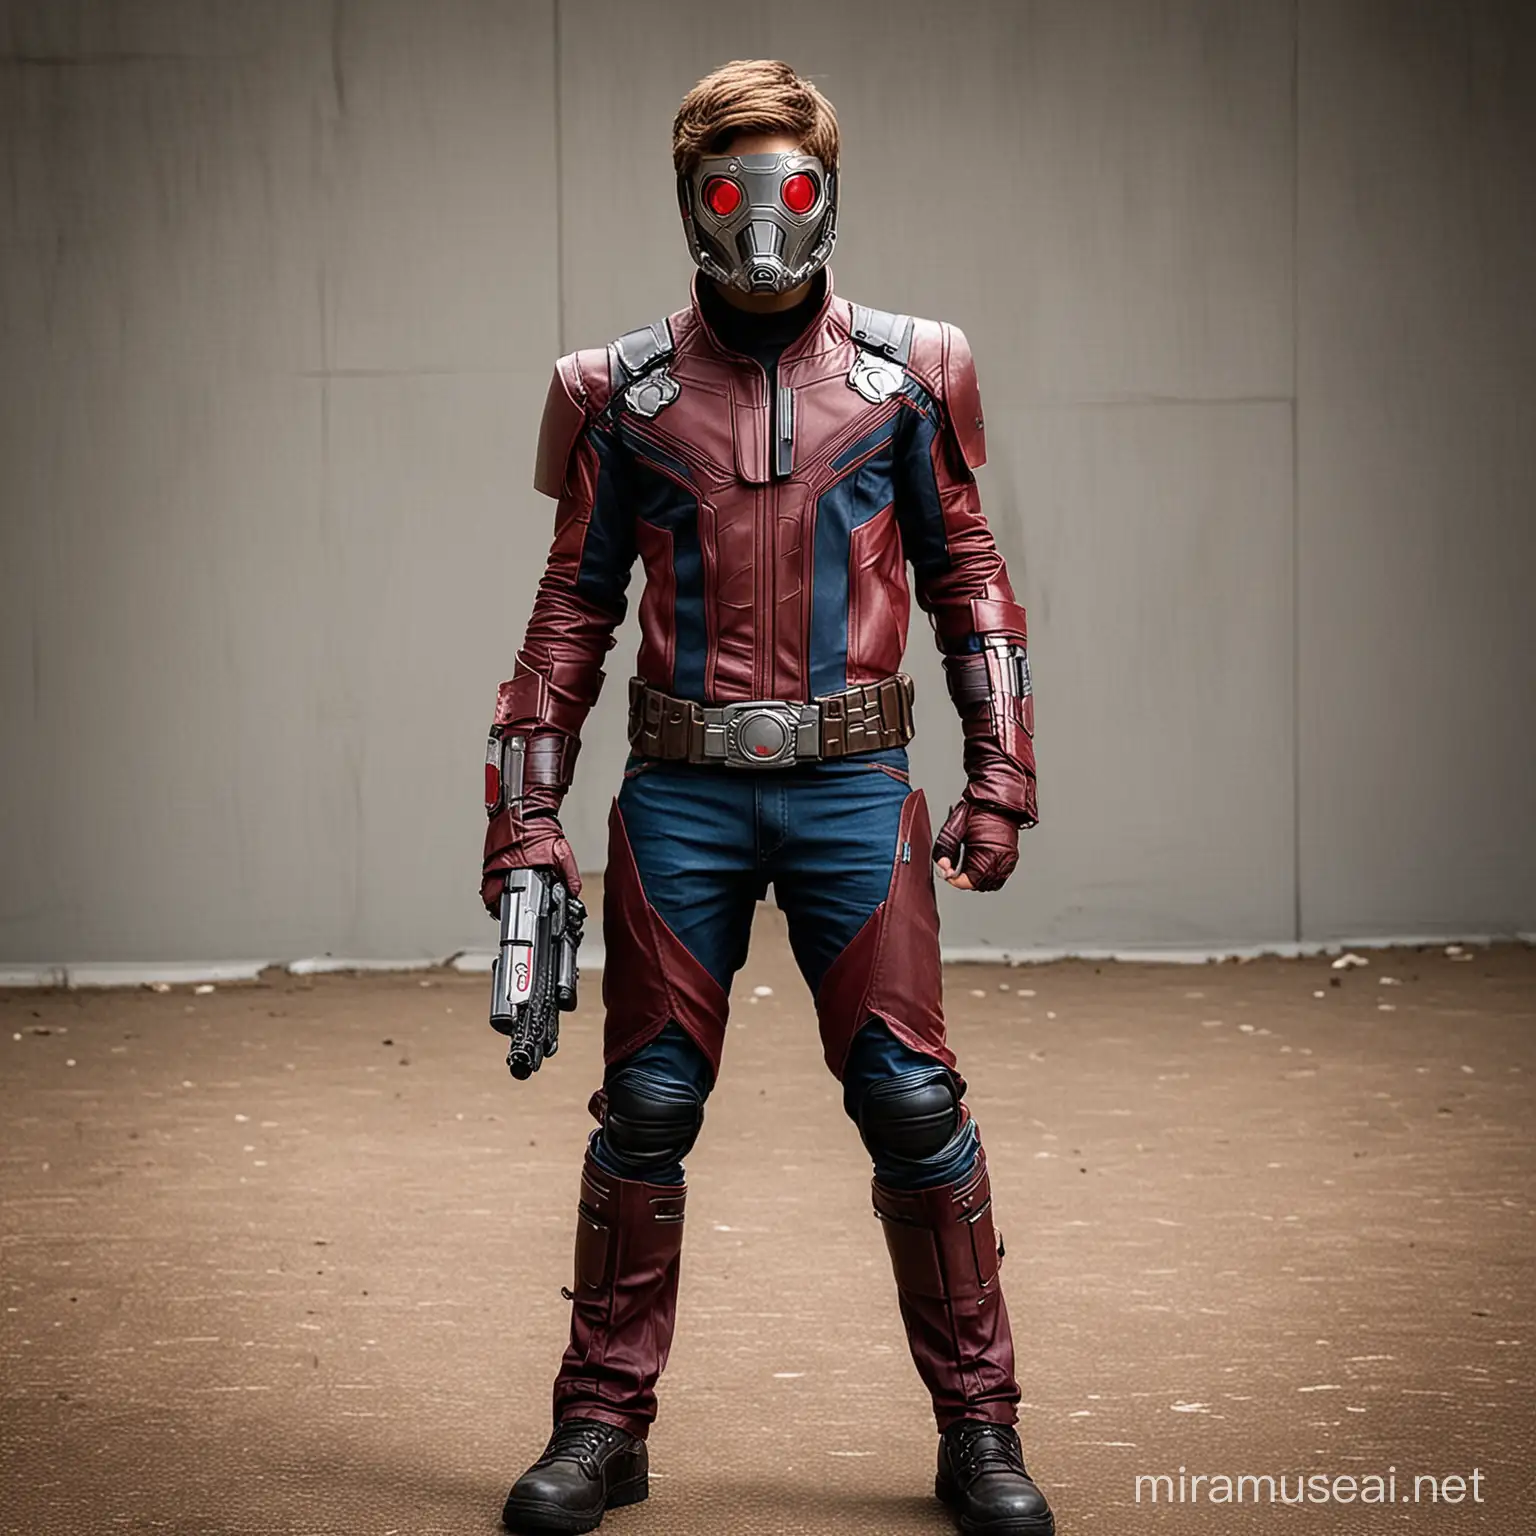 A teenage boy dressed up as Star-Lord from Guardians of the Galaxy